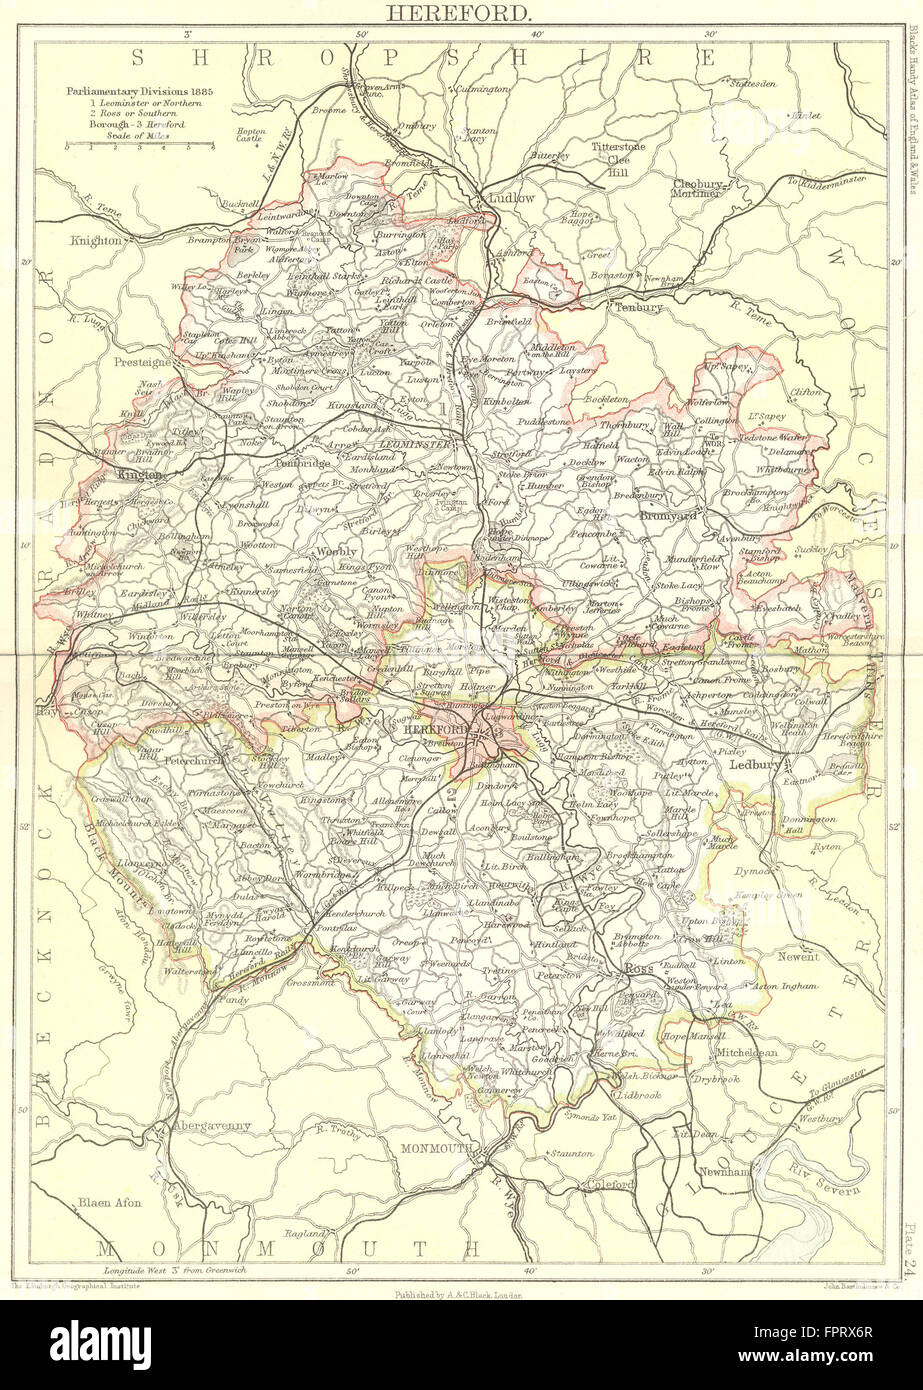 HEREFORD: Black, 1892 antique map Stock Photo